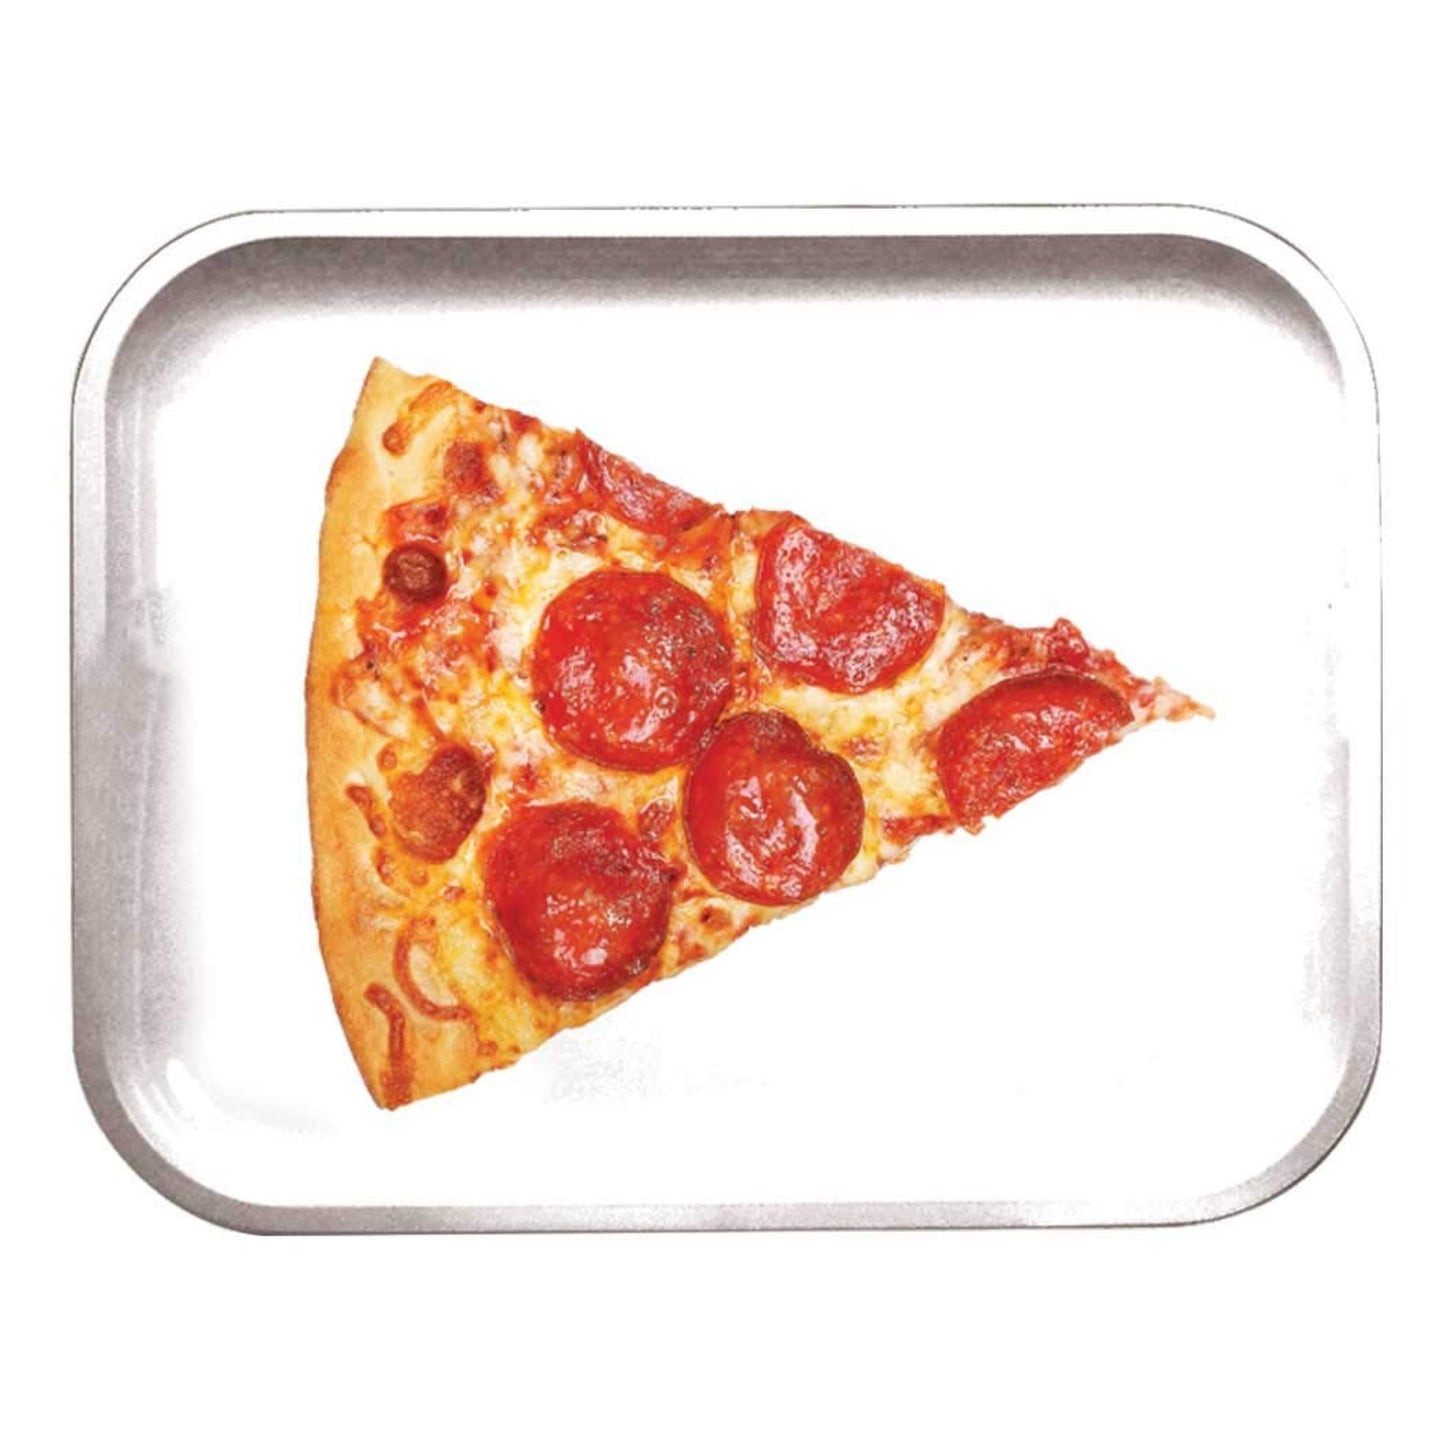 Pulsar “Slice” Metal Rolling Tray (11” x 7”) by Pulsar | Mission Dispensary